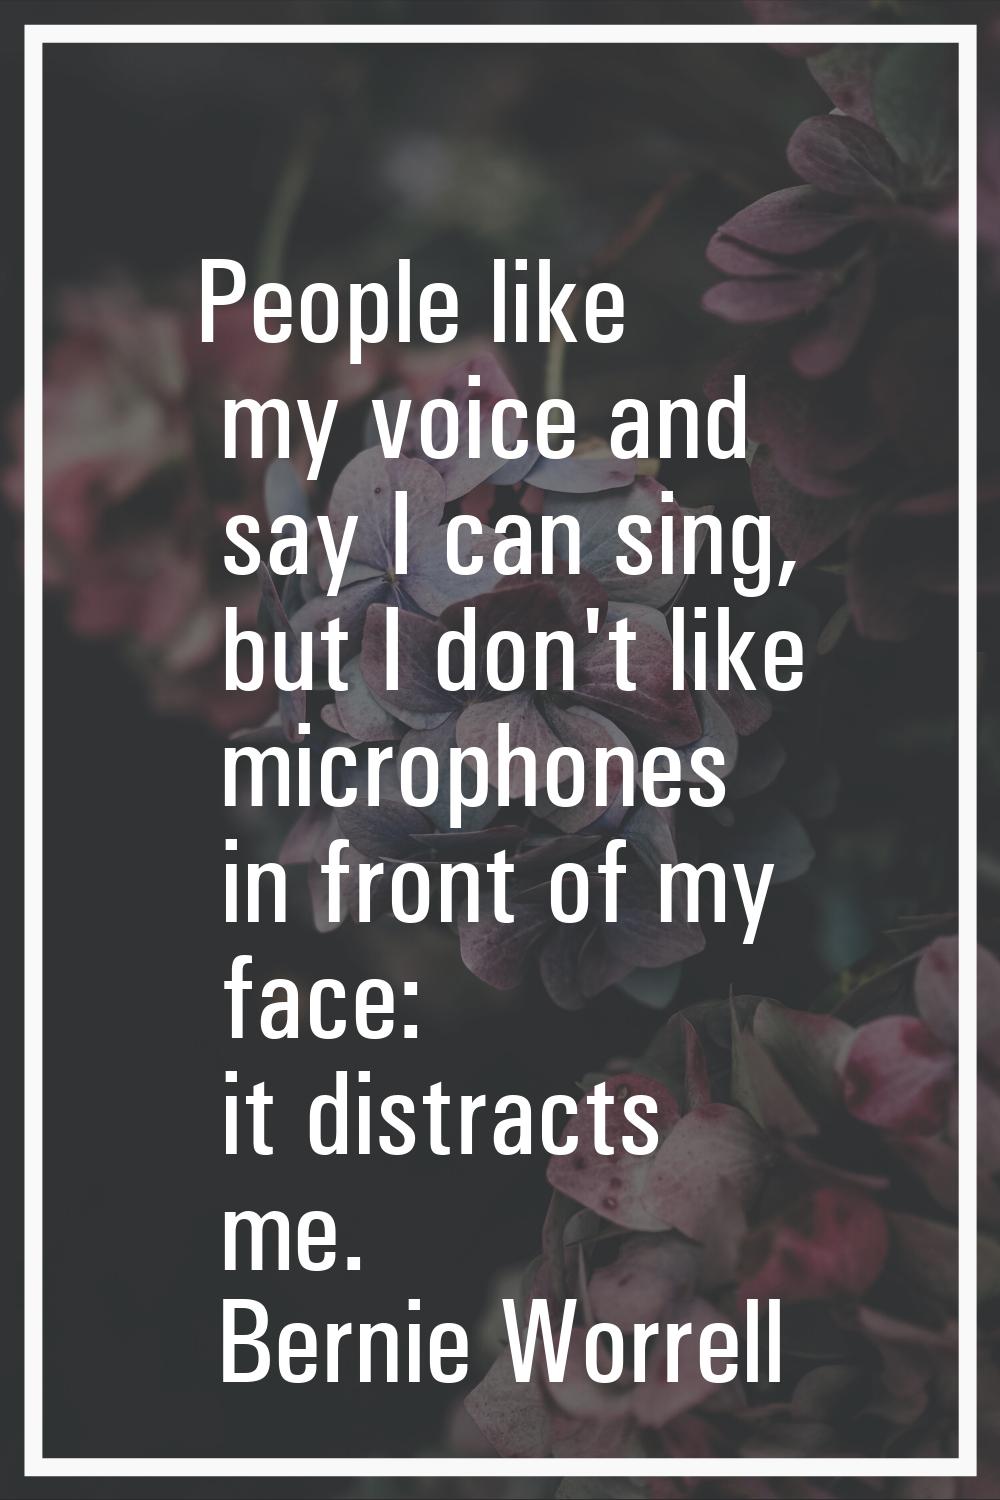 People like my voice and say I can sing, but I don't like microphones in front of my face: it distr